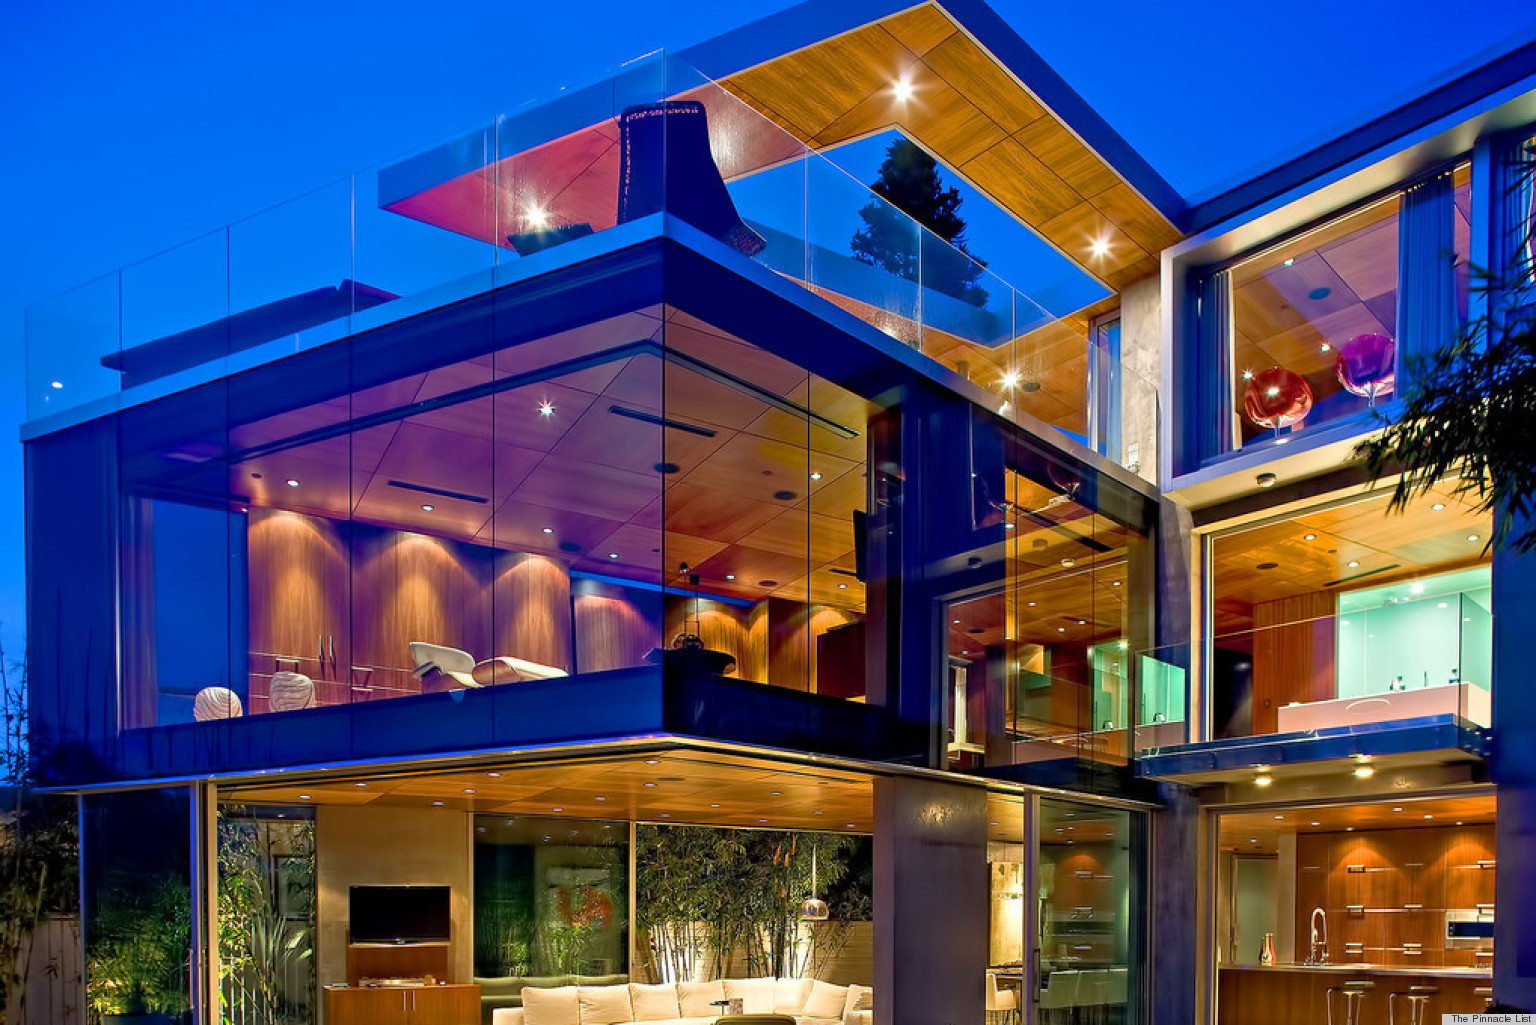 Living In A Glass House A Glimpse Into A Unique And Spectacular Lifestyle